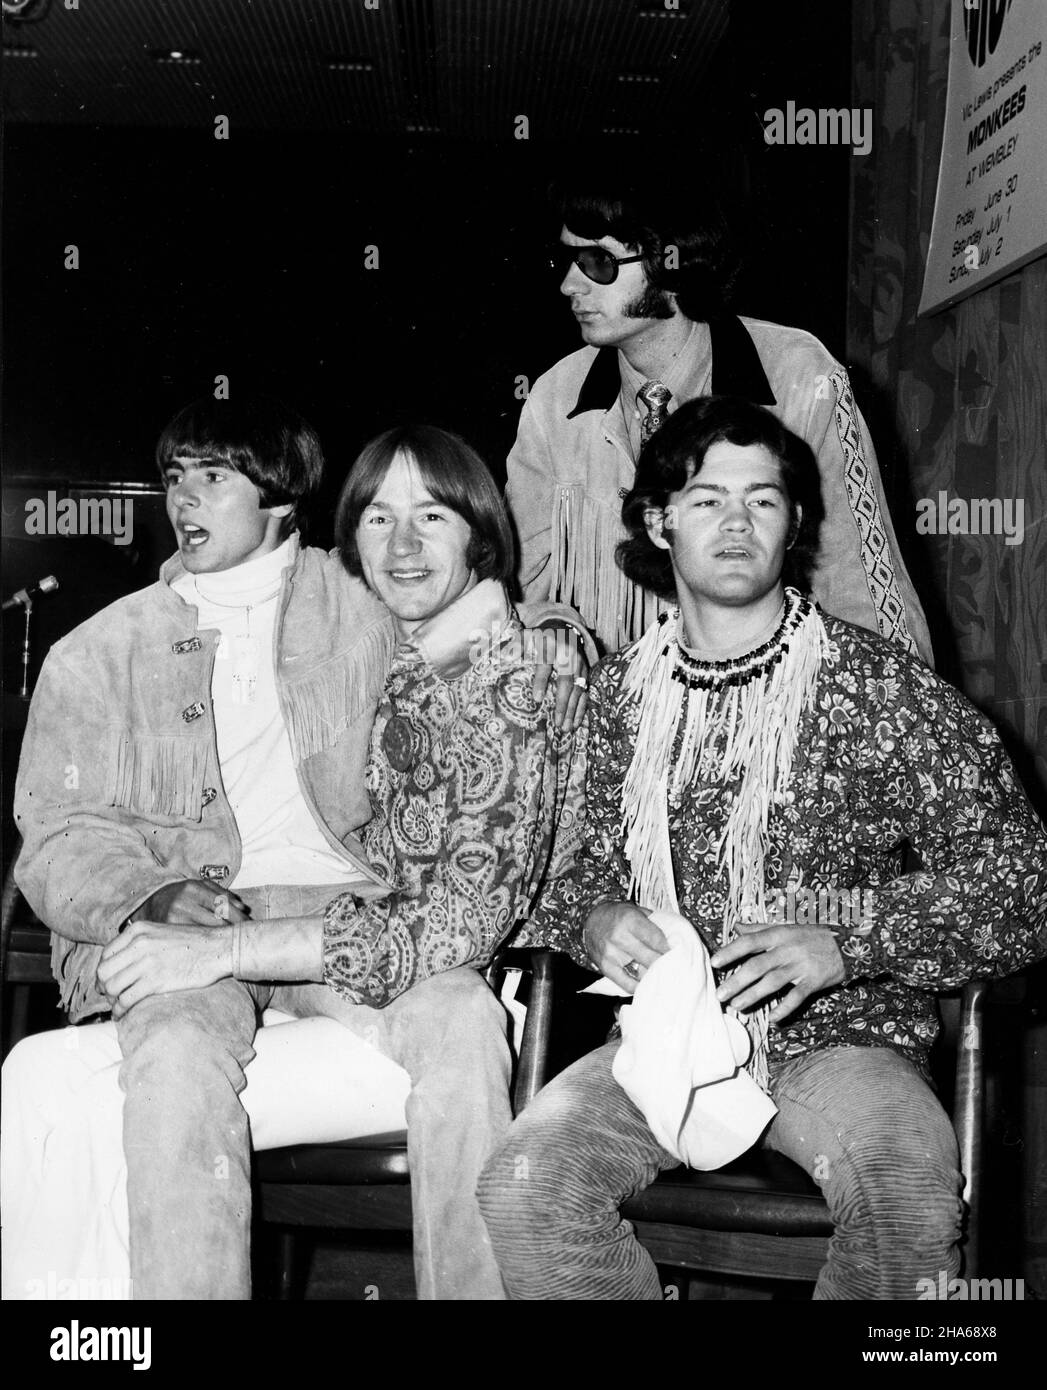 Jun 29, 1967; London, England, United Kingdom: American pop stars The Monkees PETER TORK, MICKY DOLENZ, DAVY JONES, and MIKE NESMITH making their first appearance in the U.K. (Credit Image: ¬© Keystone Press Agency/ZUMA Wire) Stock Photo